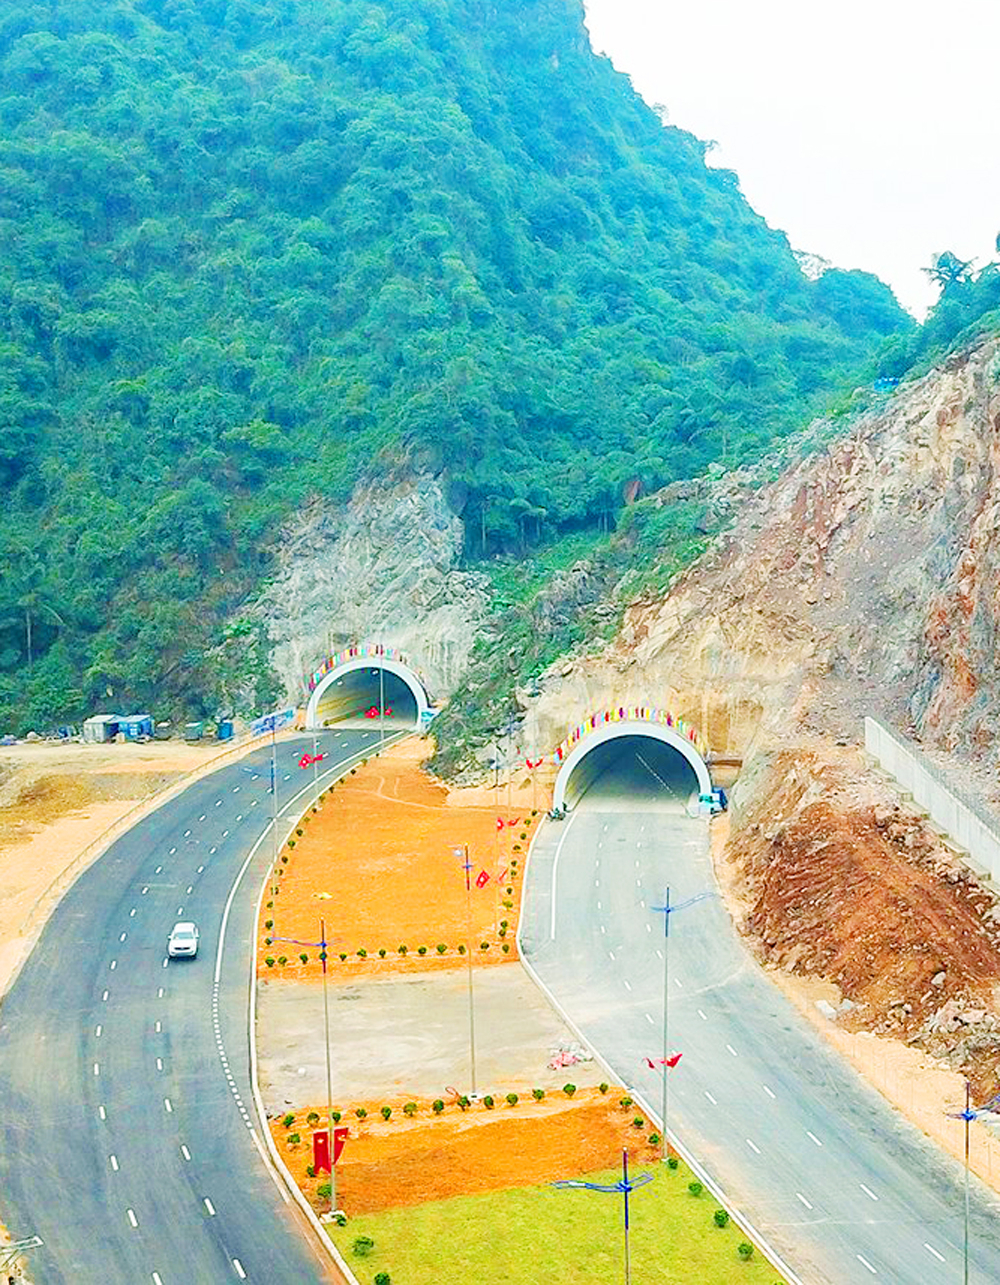 The highlight of the project is a mountain tunnel with a total length of 235 metres. The road is designed to expand the urban and tourism development space of Quang Ninh province’s two economic centres, Ha Long and Cam Pha.